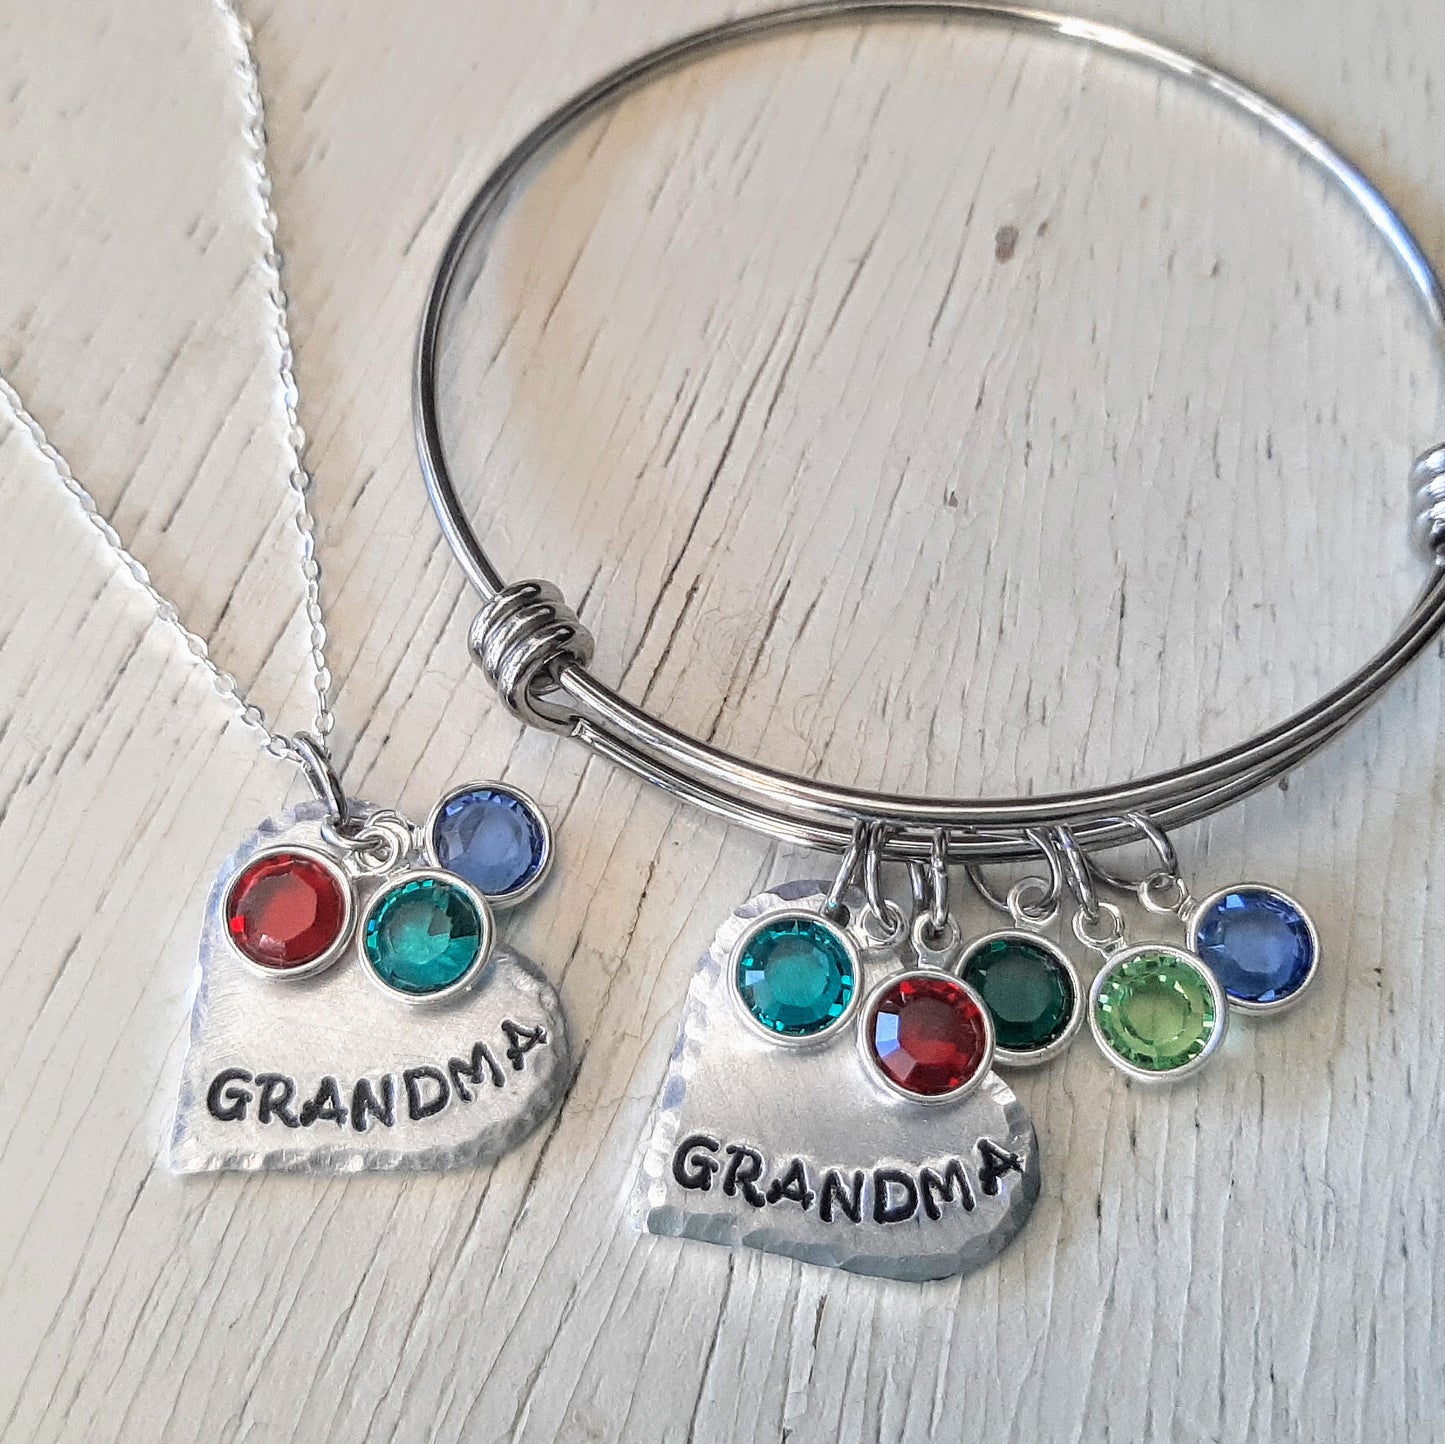 Heart Name Necklace with Birthstones